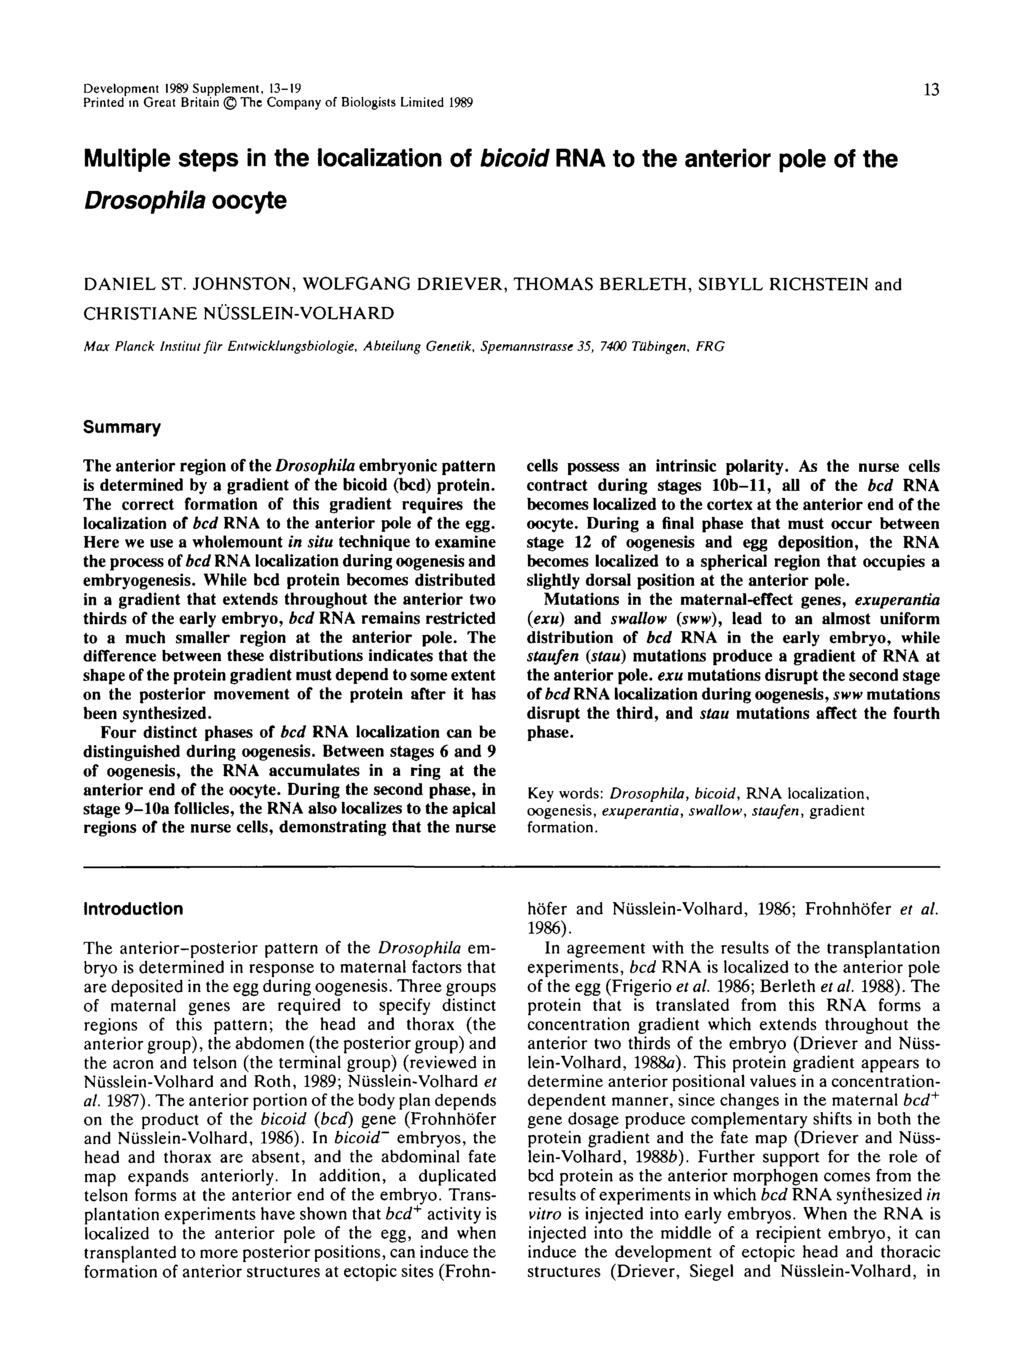 Development 1989 Supplement, 13-19 Printed in Great Britain The Company of Biologists Limited 1989 13 Multiple steps in the localization of bicoid RNA to the anterior pole of the Drosophila oocyte